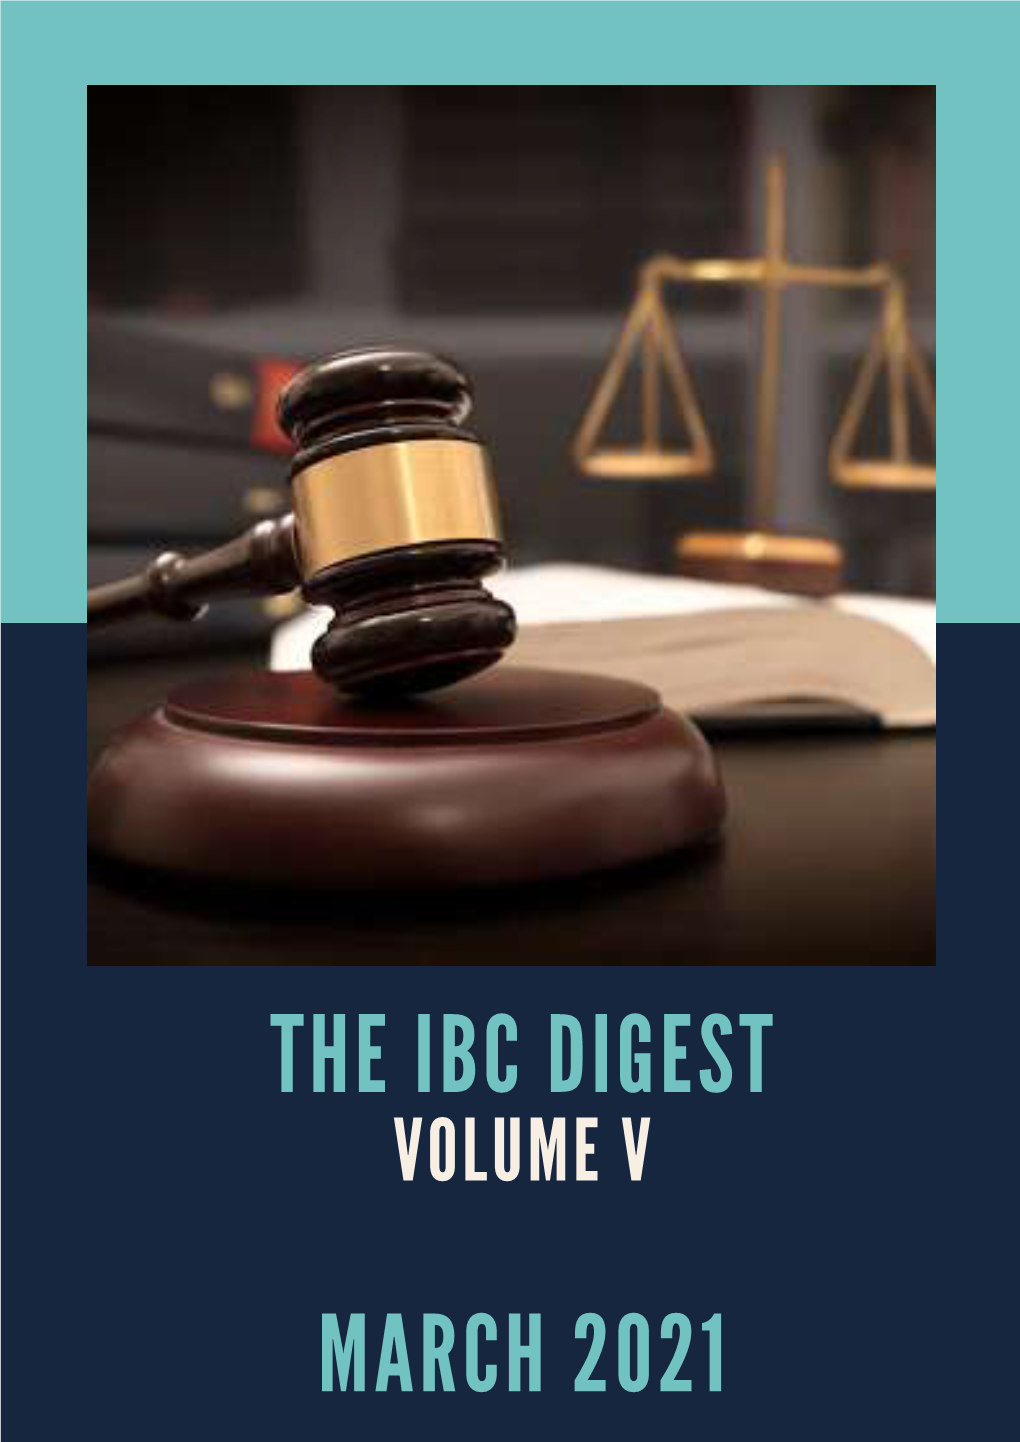 The Ibc Digest March 2021